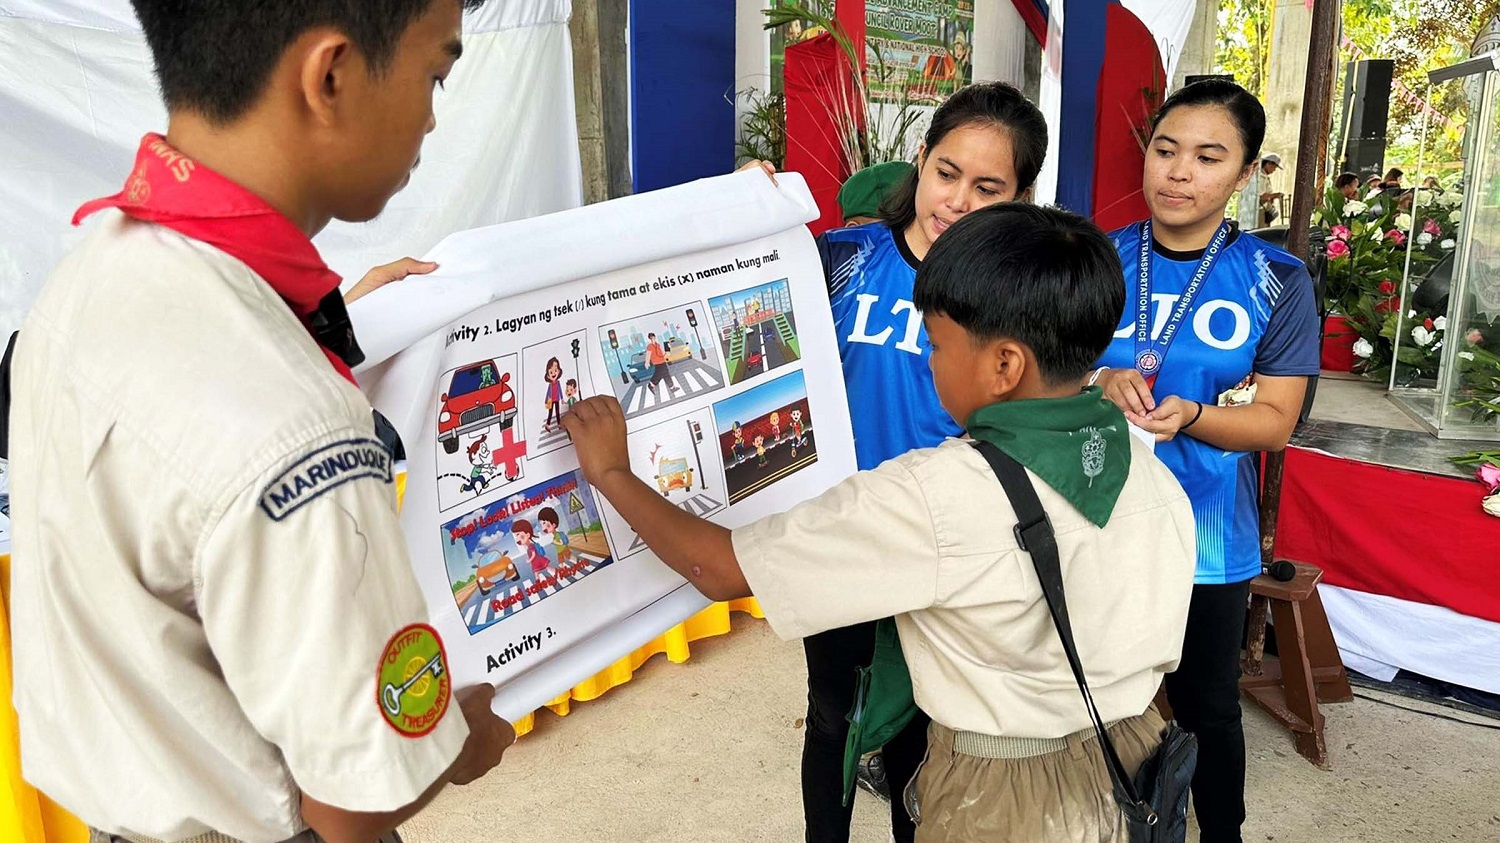 LTO conducts road safety seminar to boy scouts in Marinduque